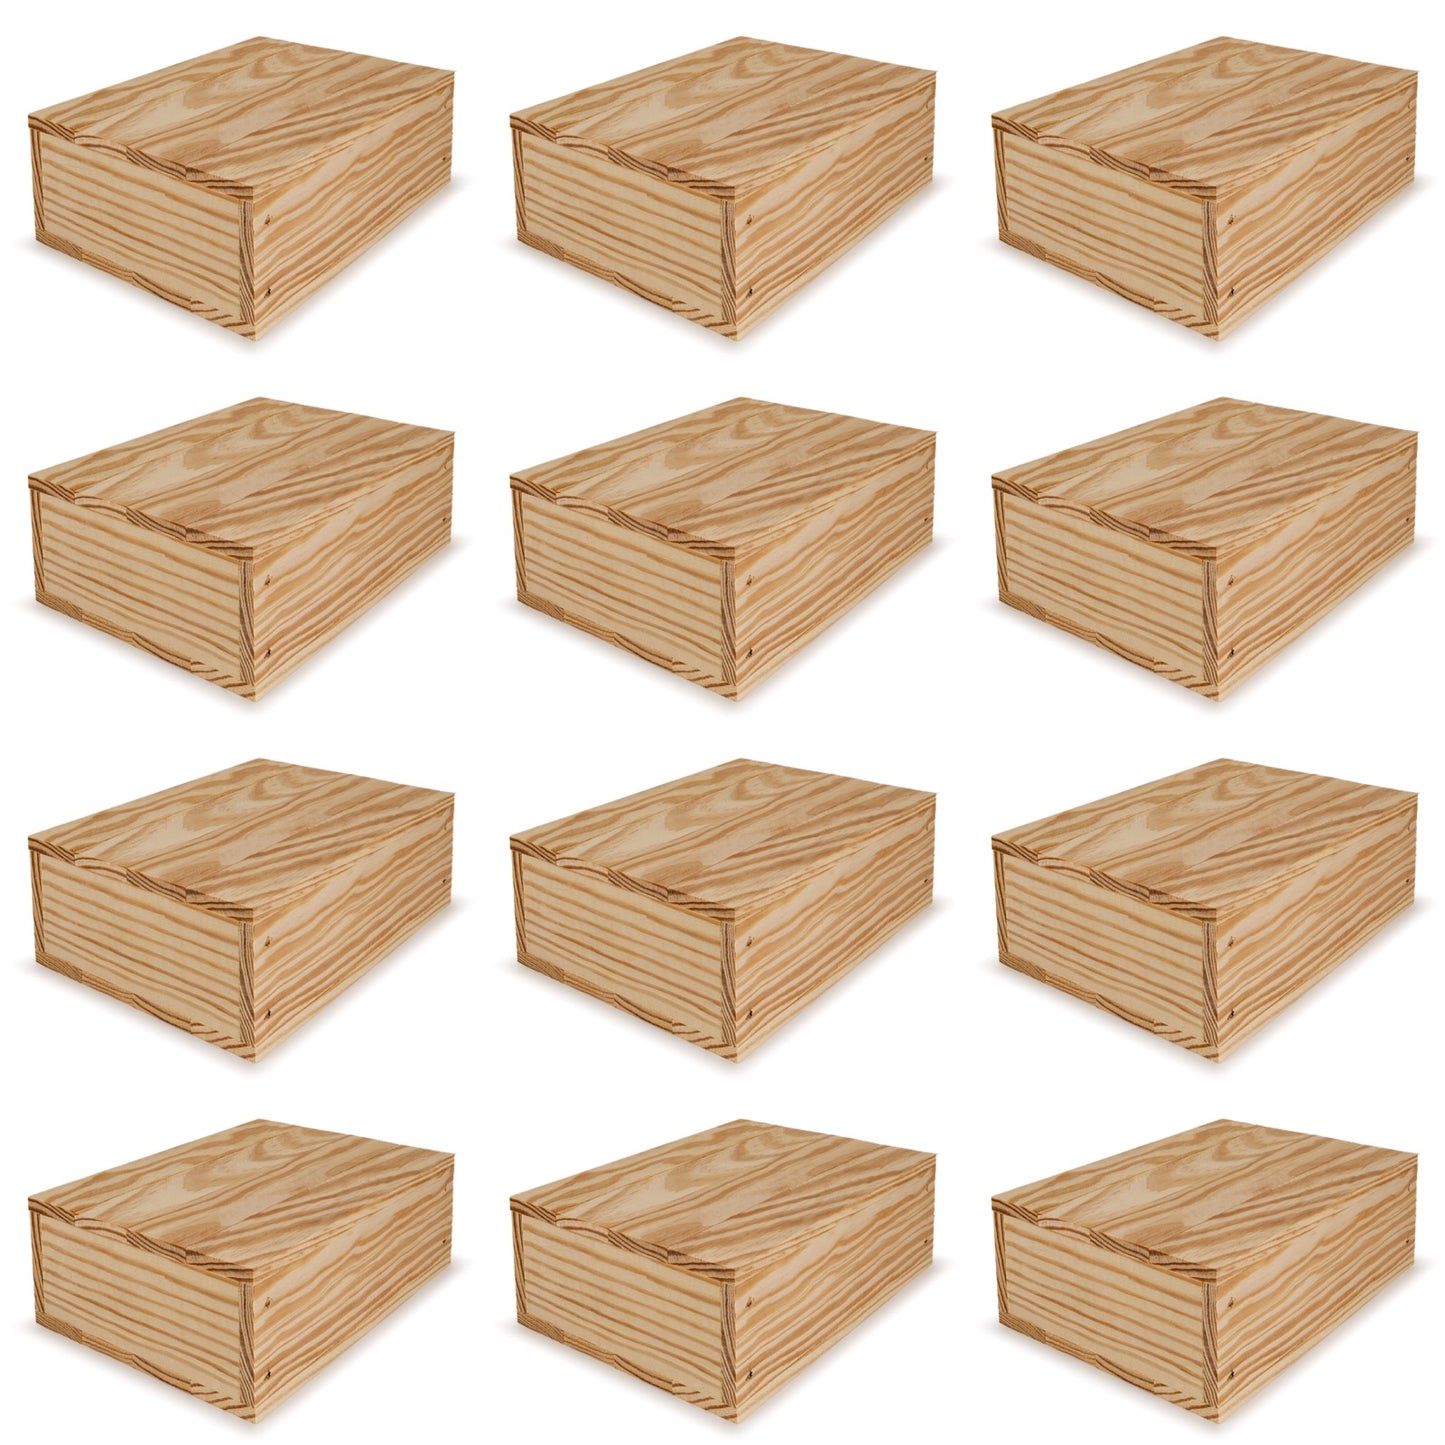 12 Small wooden crates with lid 8x6.25x2.75